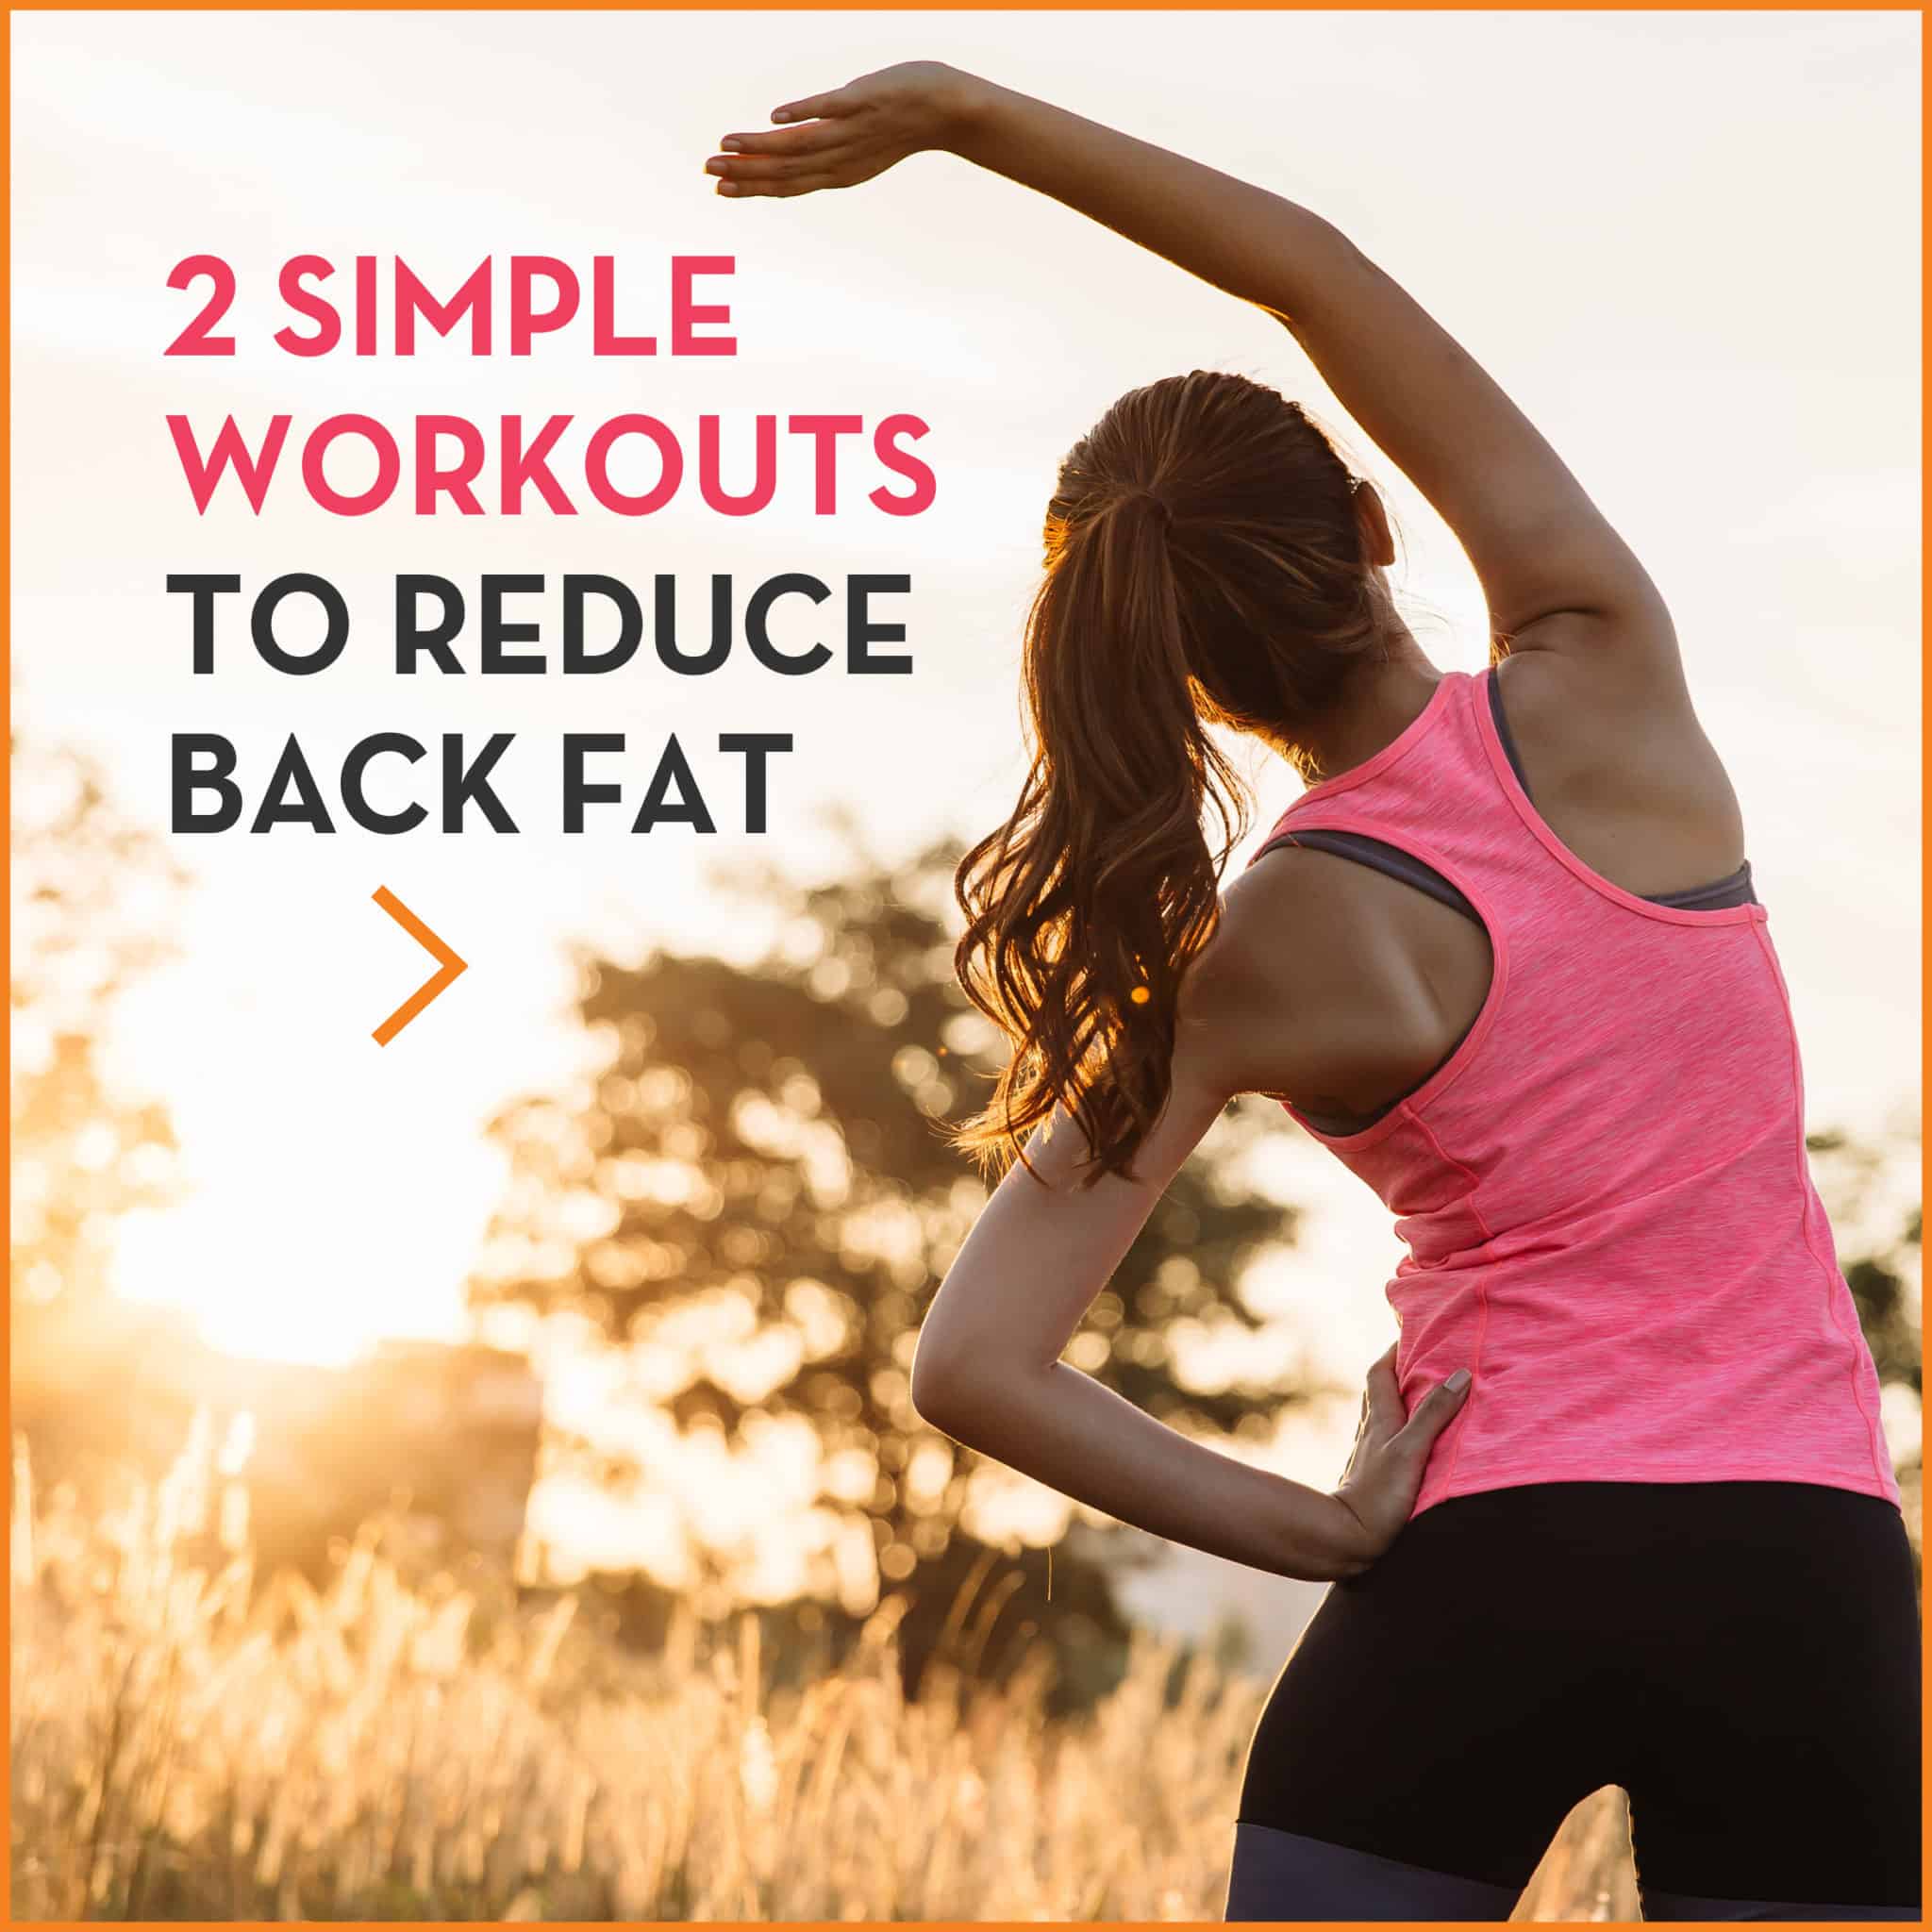 Workout Exercises For Back Fat Kayaworkout Co